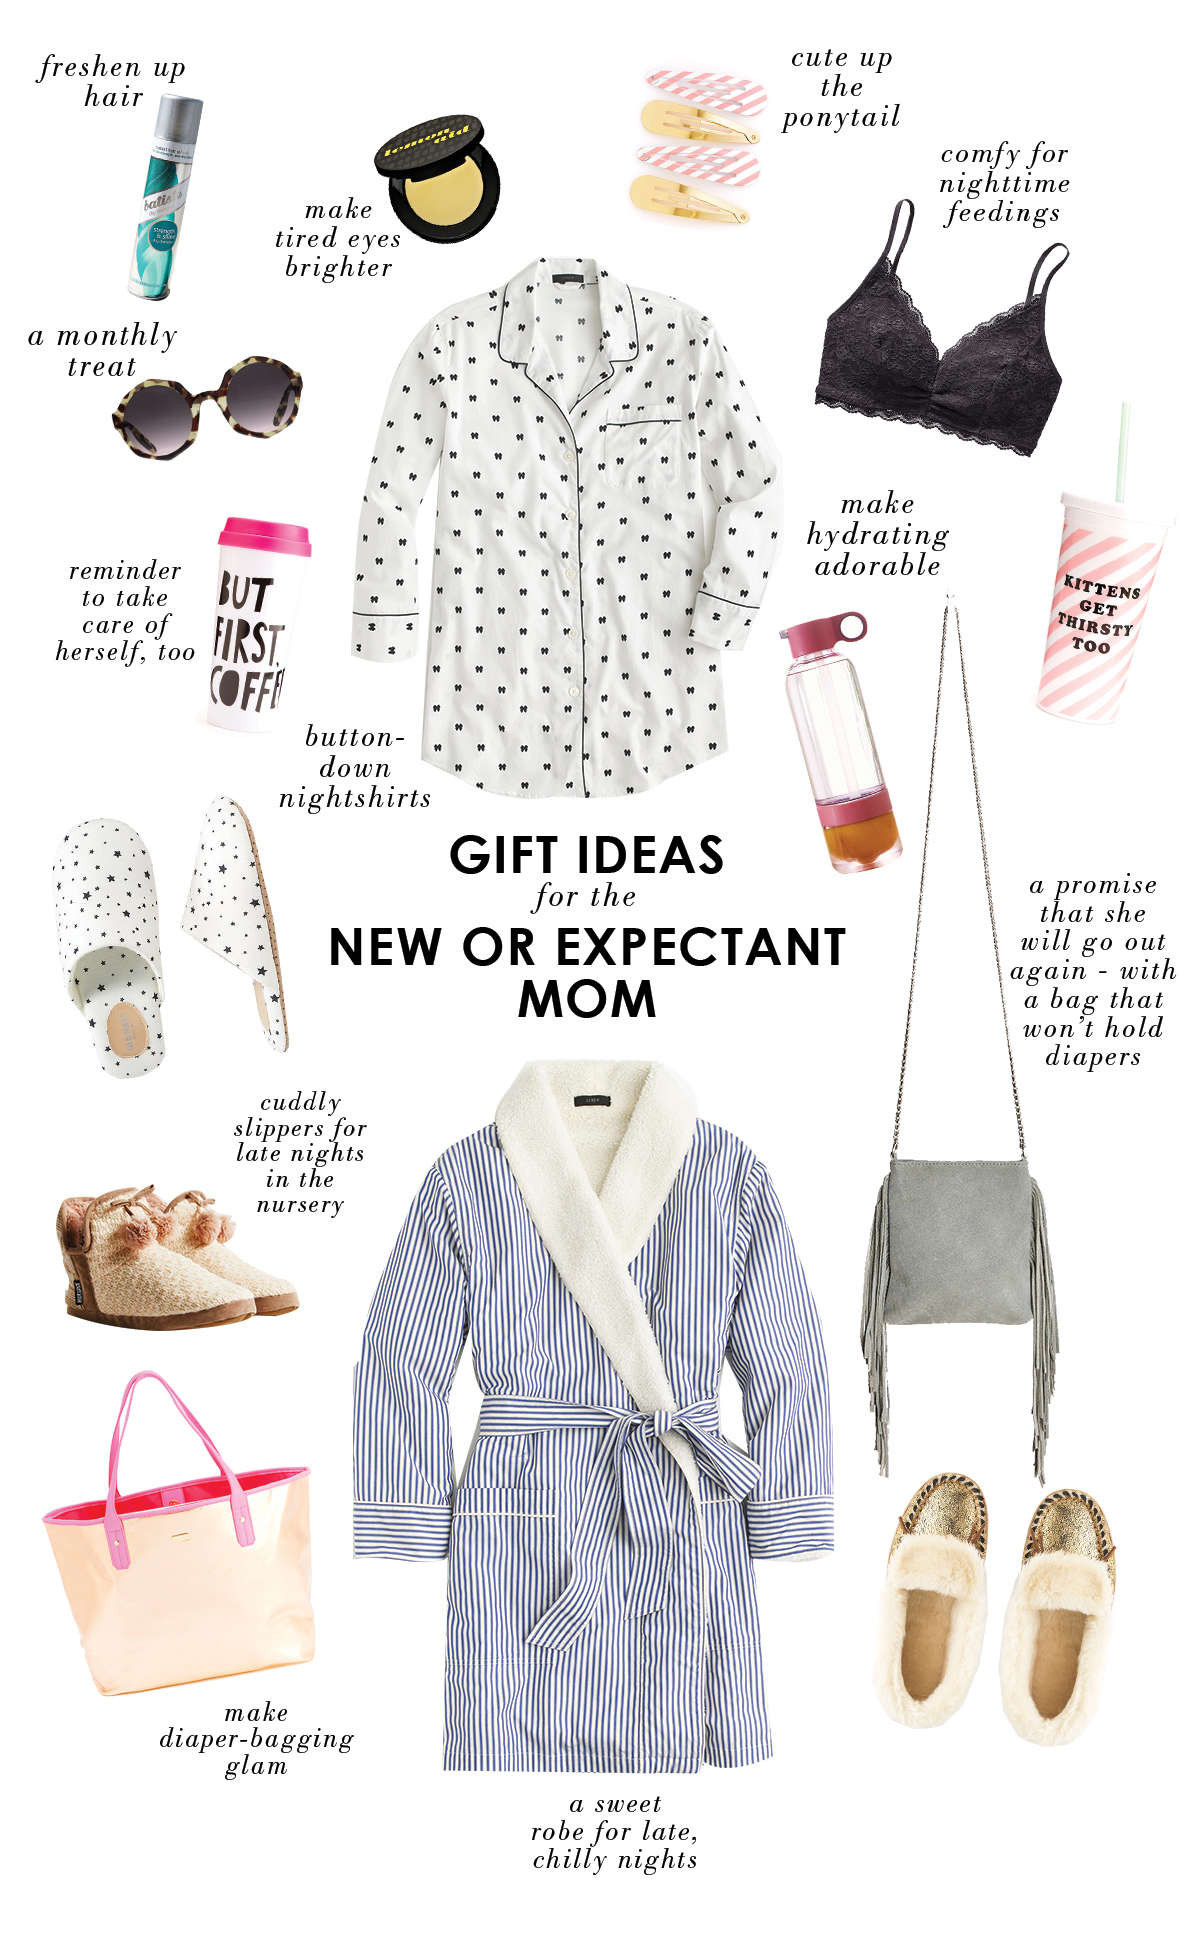 New Mother Gift Ideas
 t ideas for a new or expectant mom